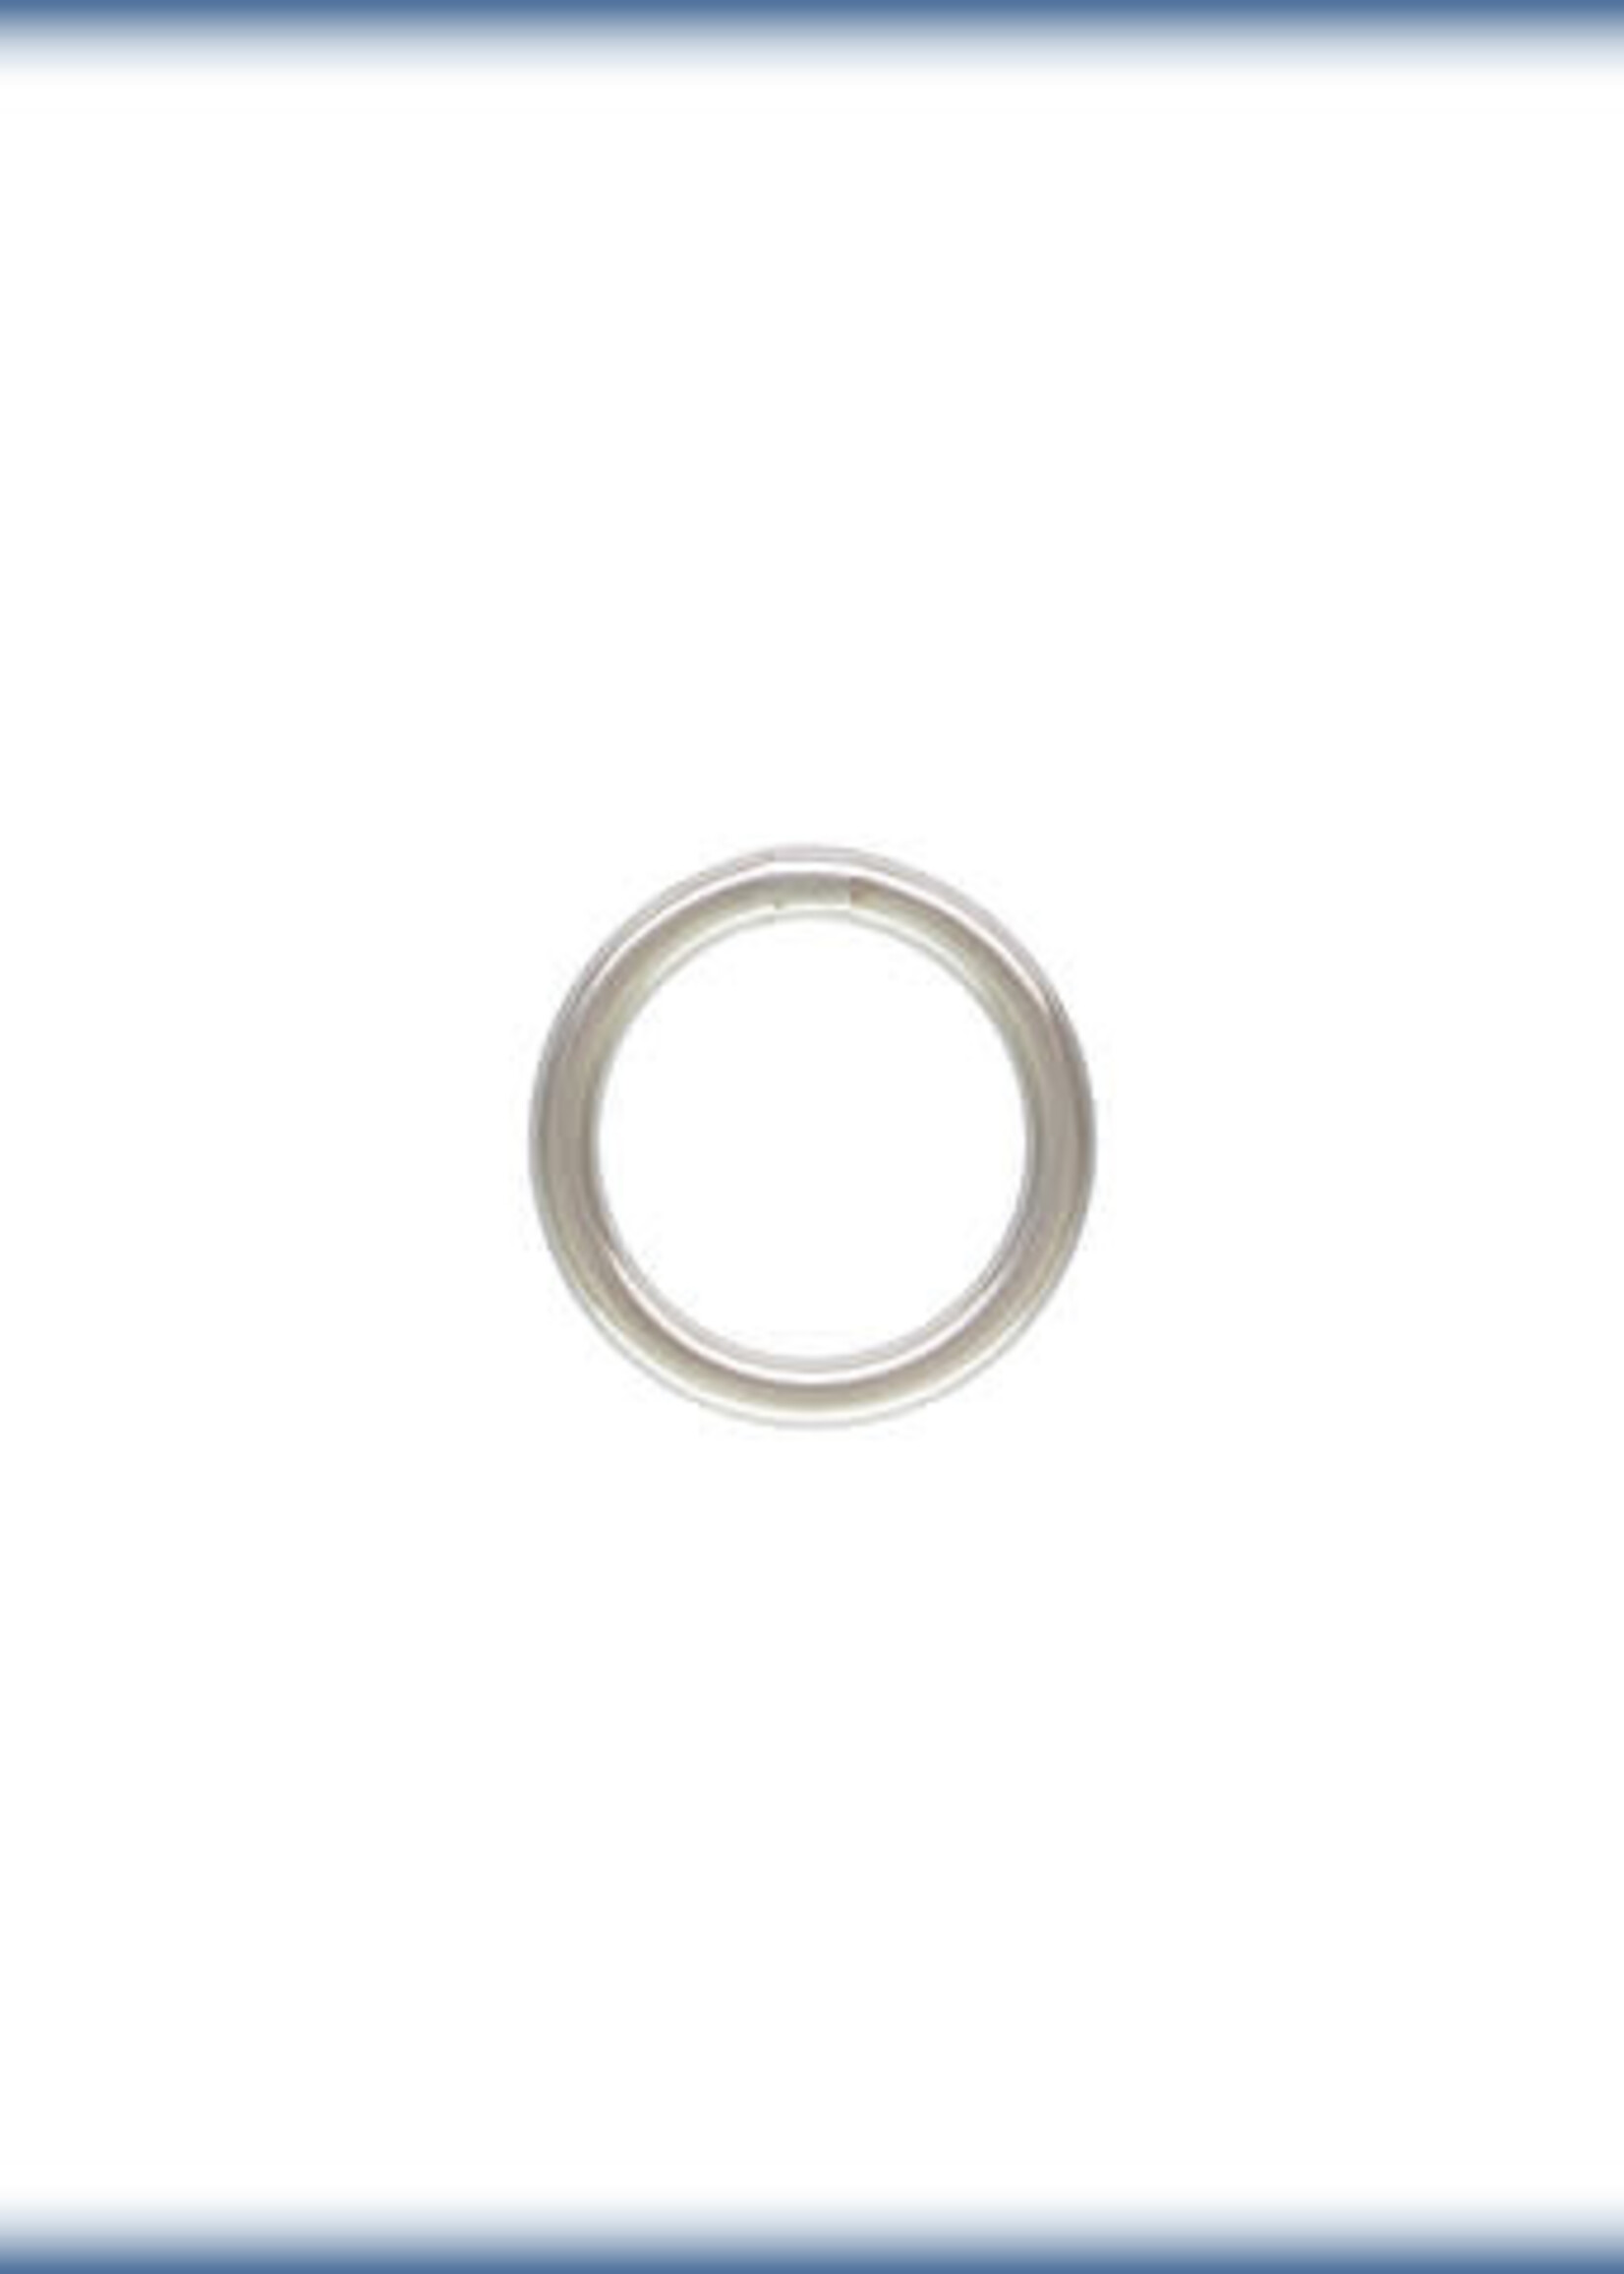 5mm Closed Ring 21ga Sterling Silver Qty 10